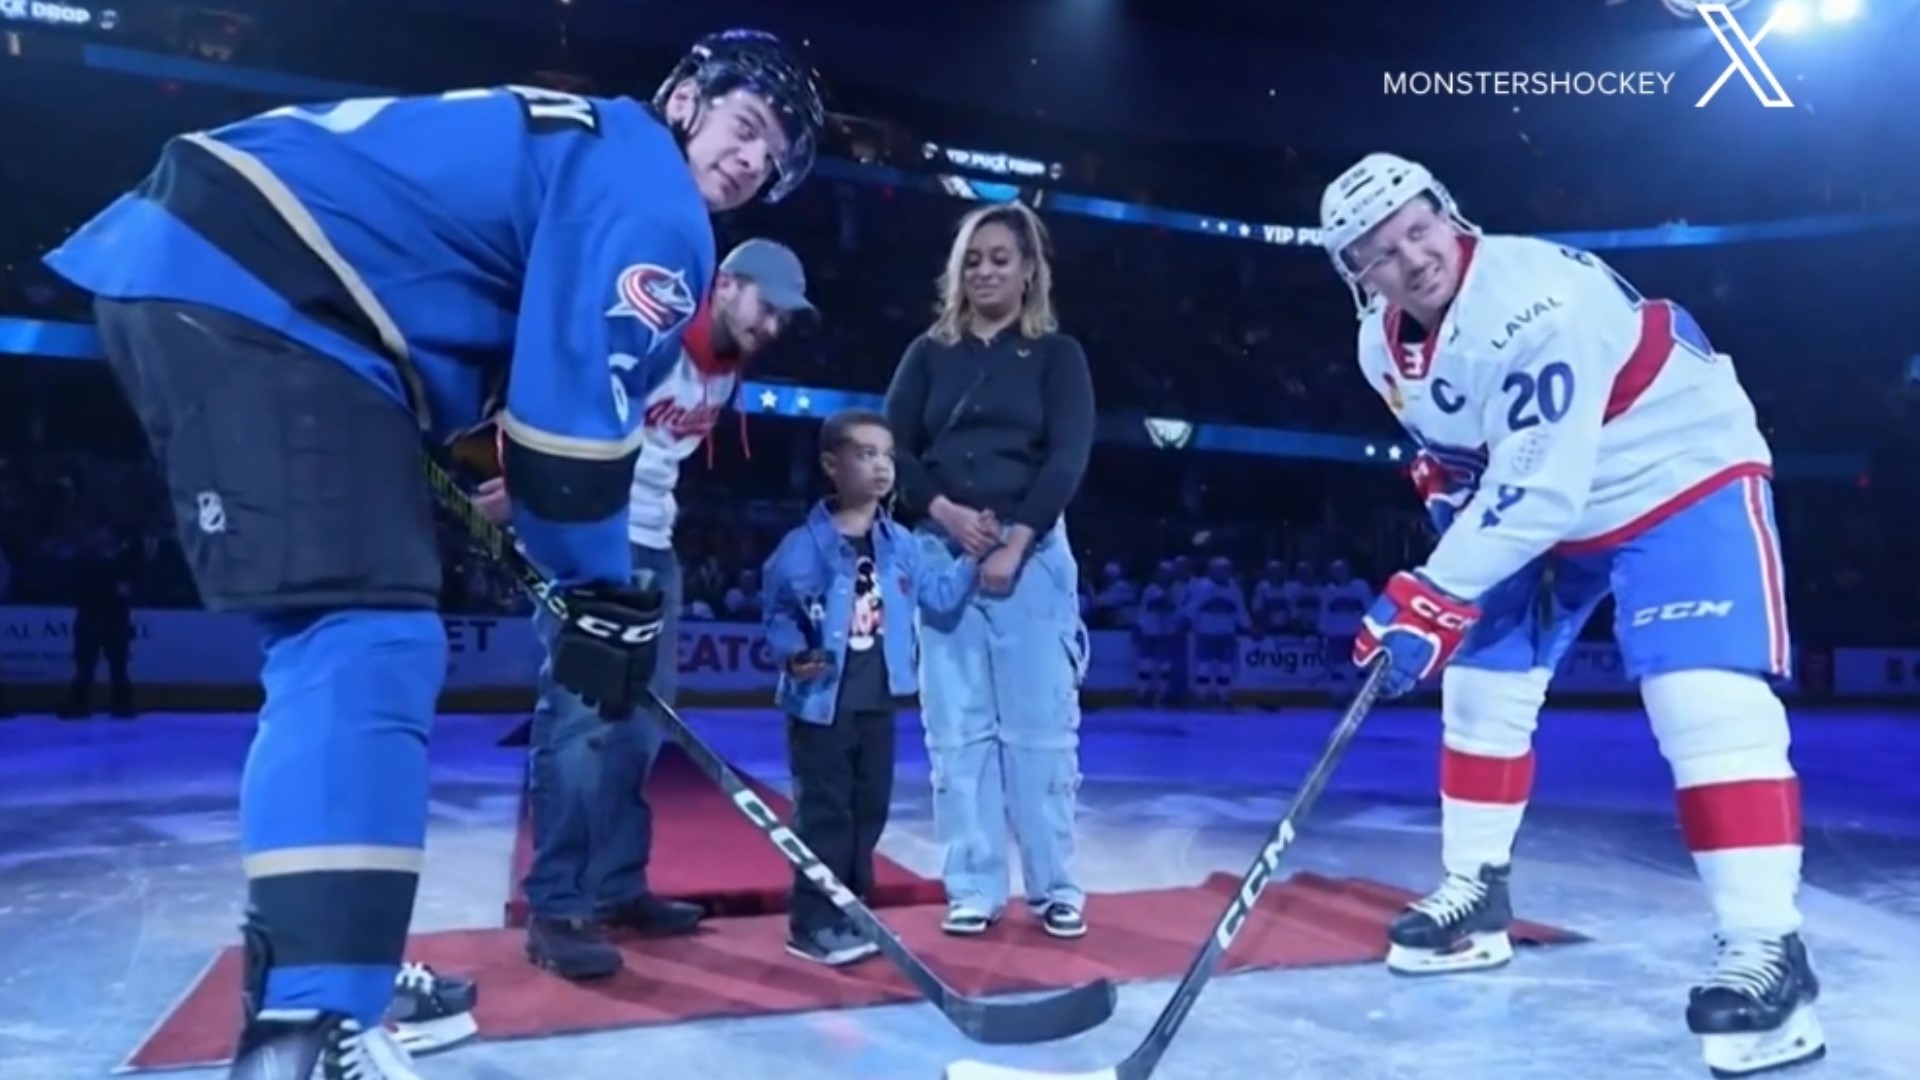 In a TikTok video now seen by nearly 3 million people, a local mom started a search for a man who she says saved her son's life at a Cleveland Monsters hockey game.